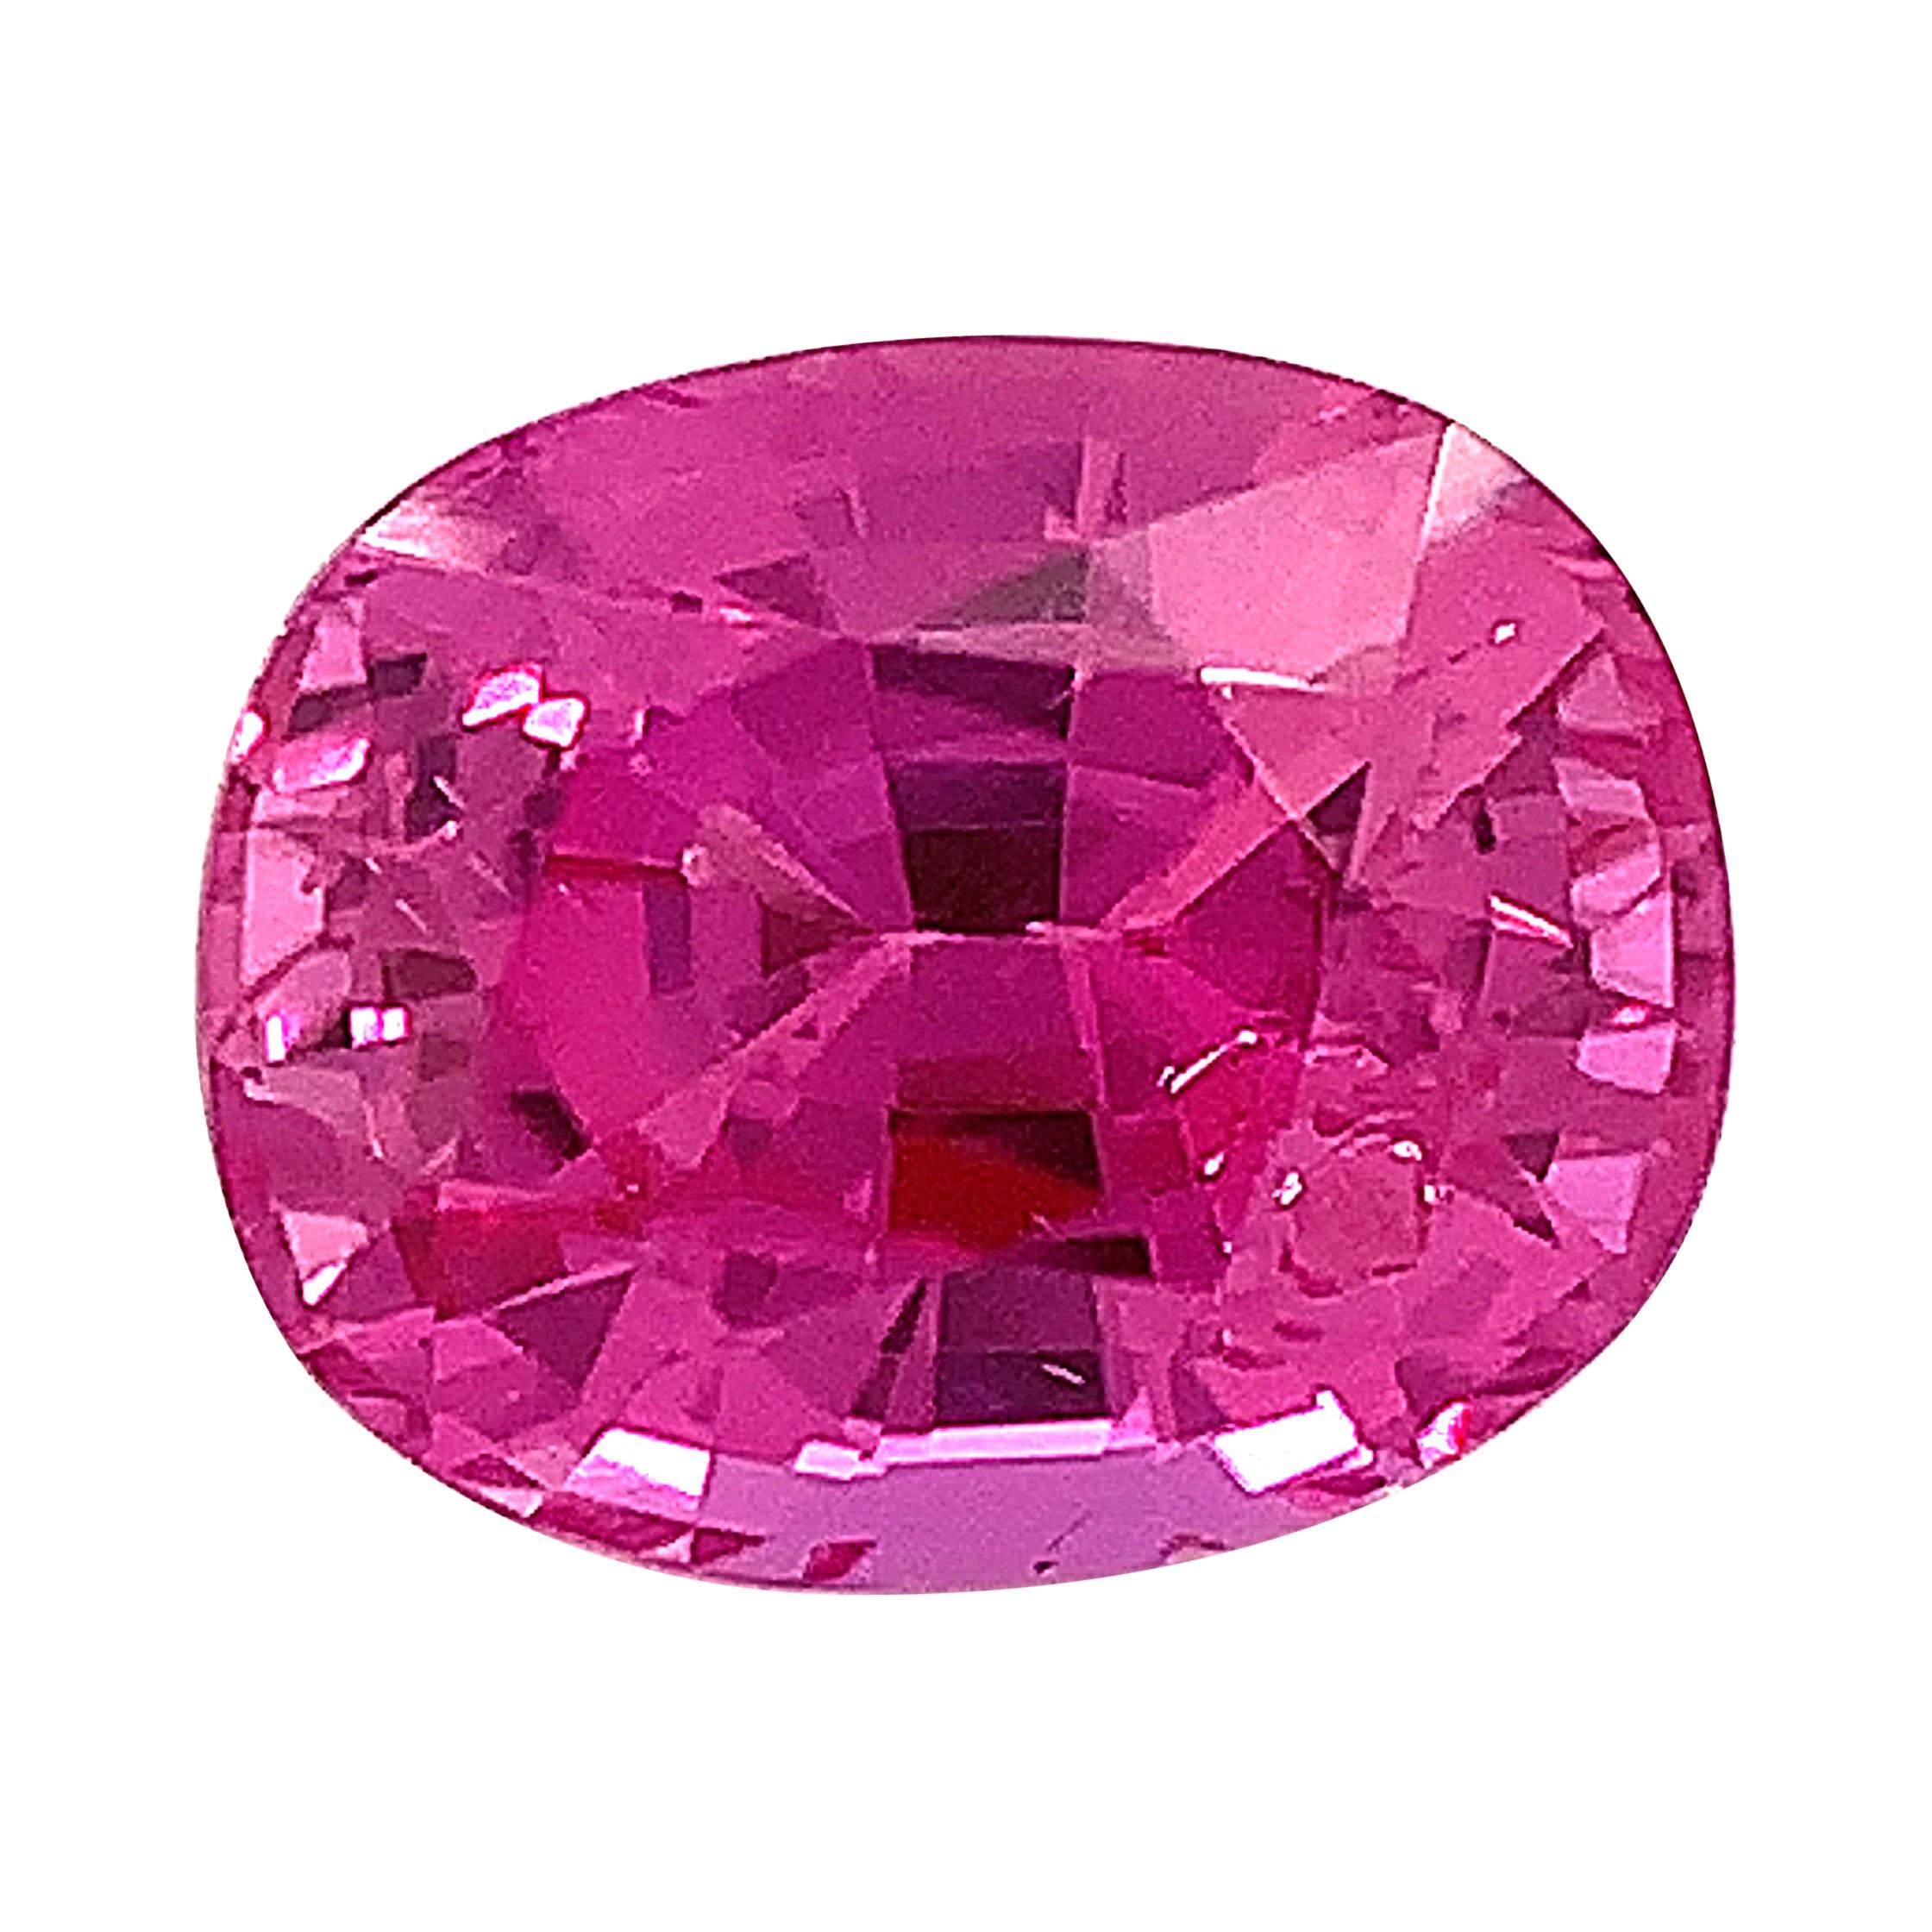 Unheated 1.39 Carat Burmese Pink Sapphire, Unset Loose Gemstone, GIA Certified For Sale